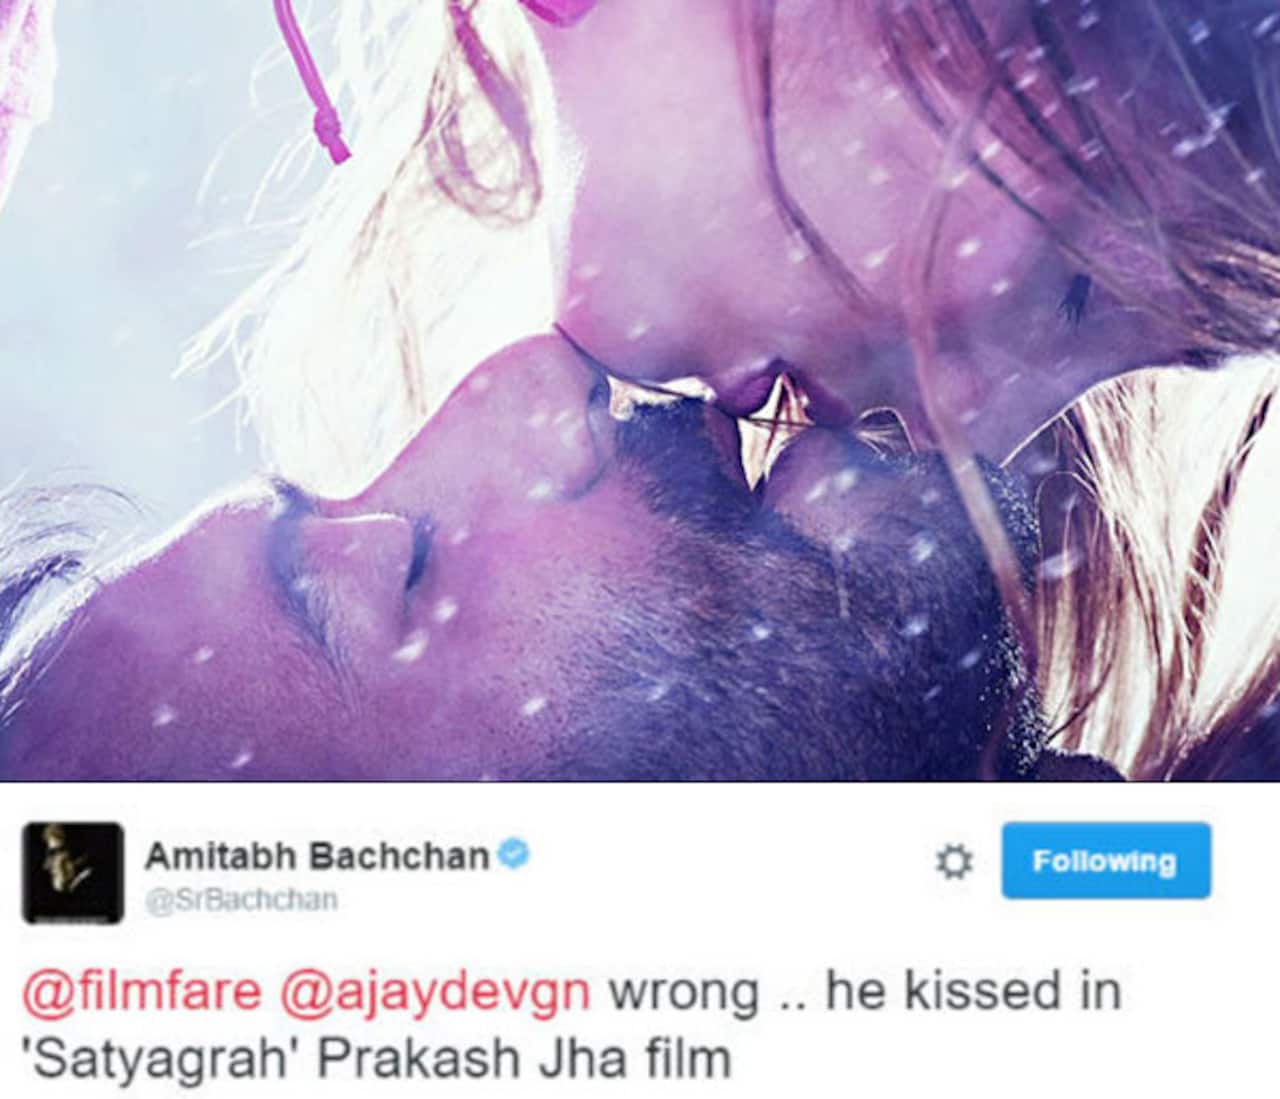 Did Amitabh Bachchan call out Ajay Devgn's bluff about first onscreen kiss in Shivaay?